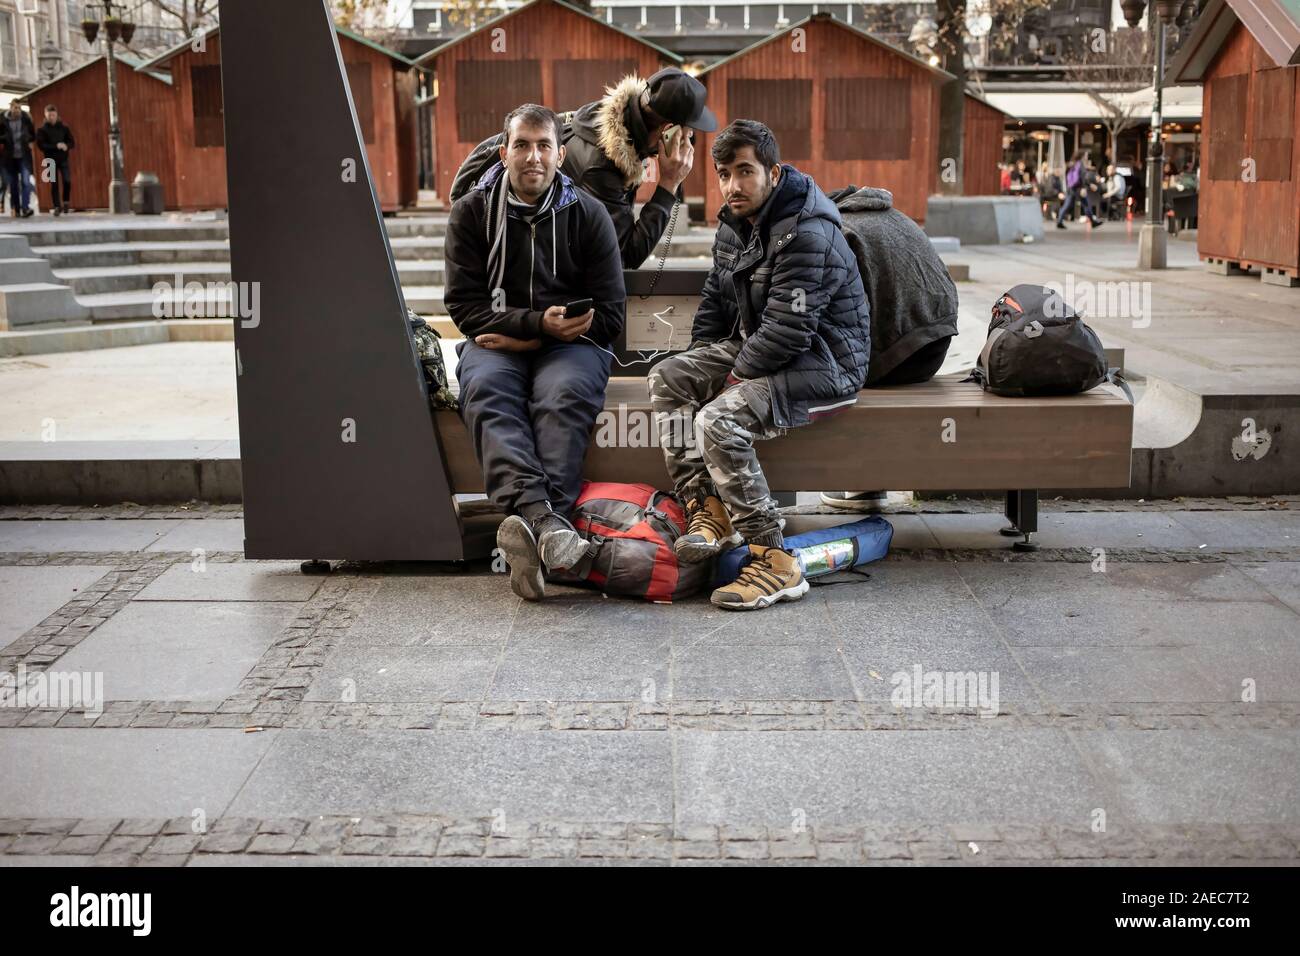 Serbia, Nov 26, 2019: A small group of migrants from the Middle East charging their cell phones at the Republic Square in Belgrade city center Stock Photo